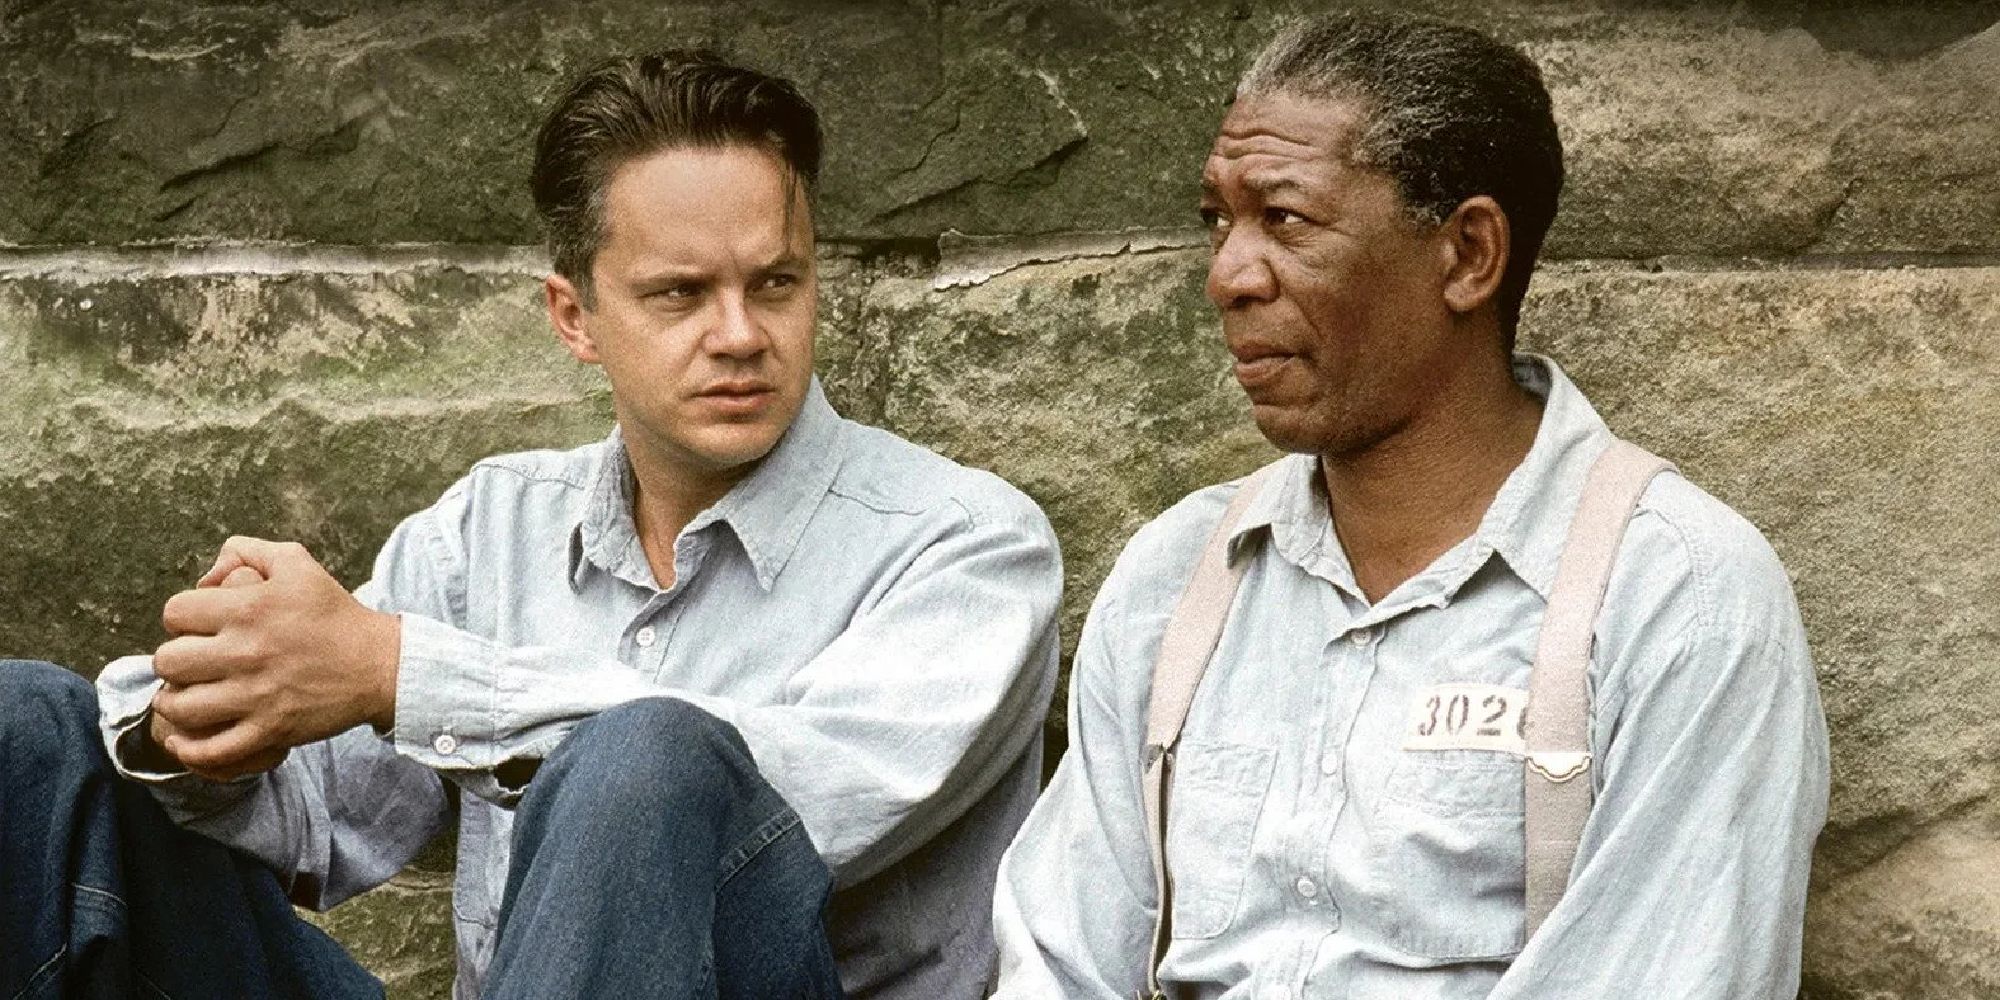 Tim Robbins as Andy Dufresne and Morgan Freeman as Red Redding in The Shawshank Redemption